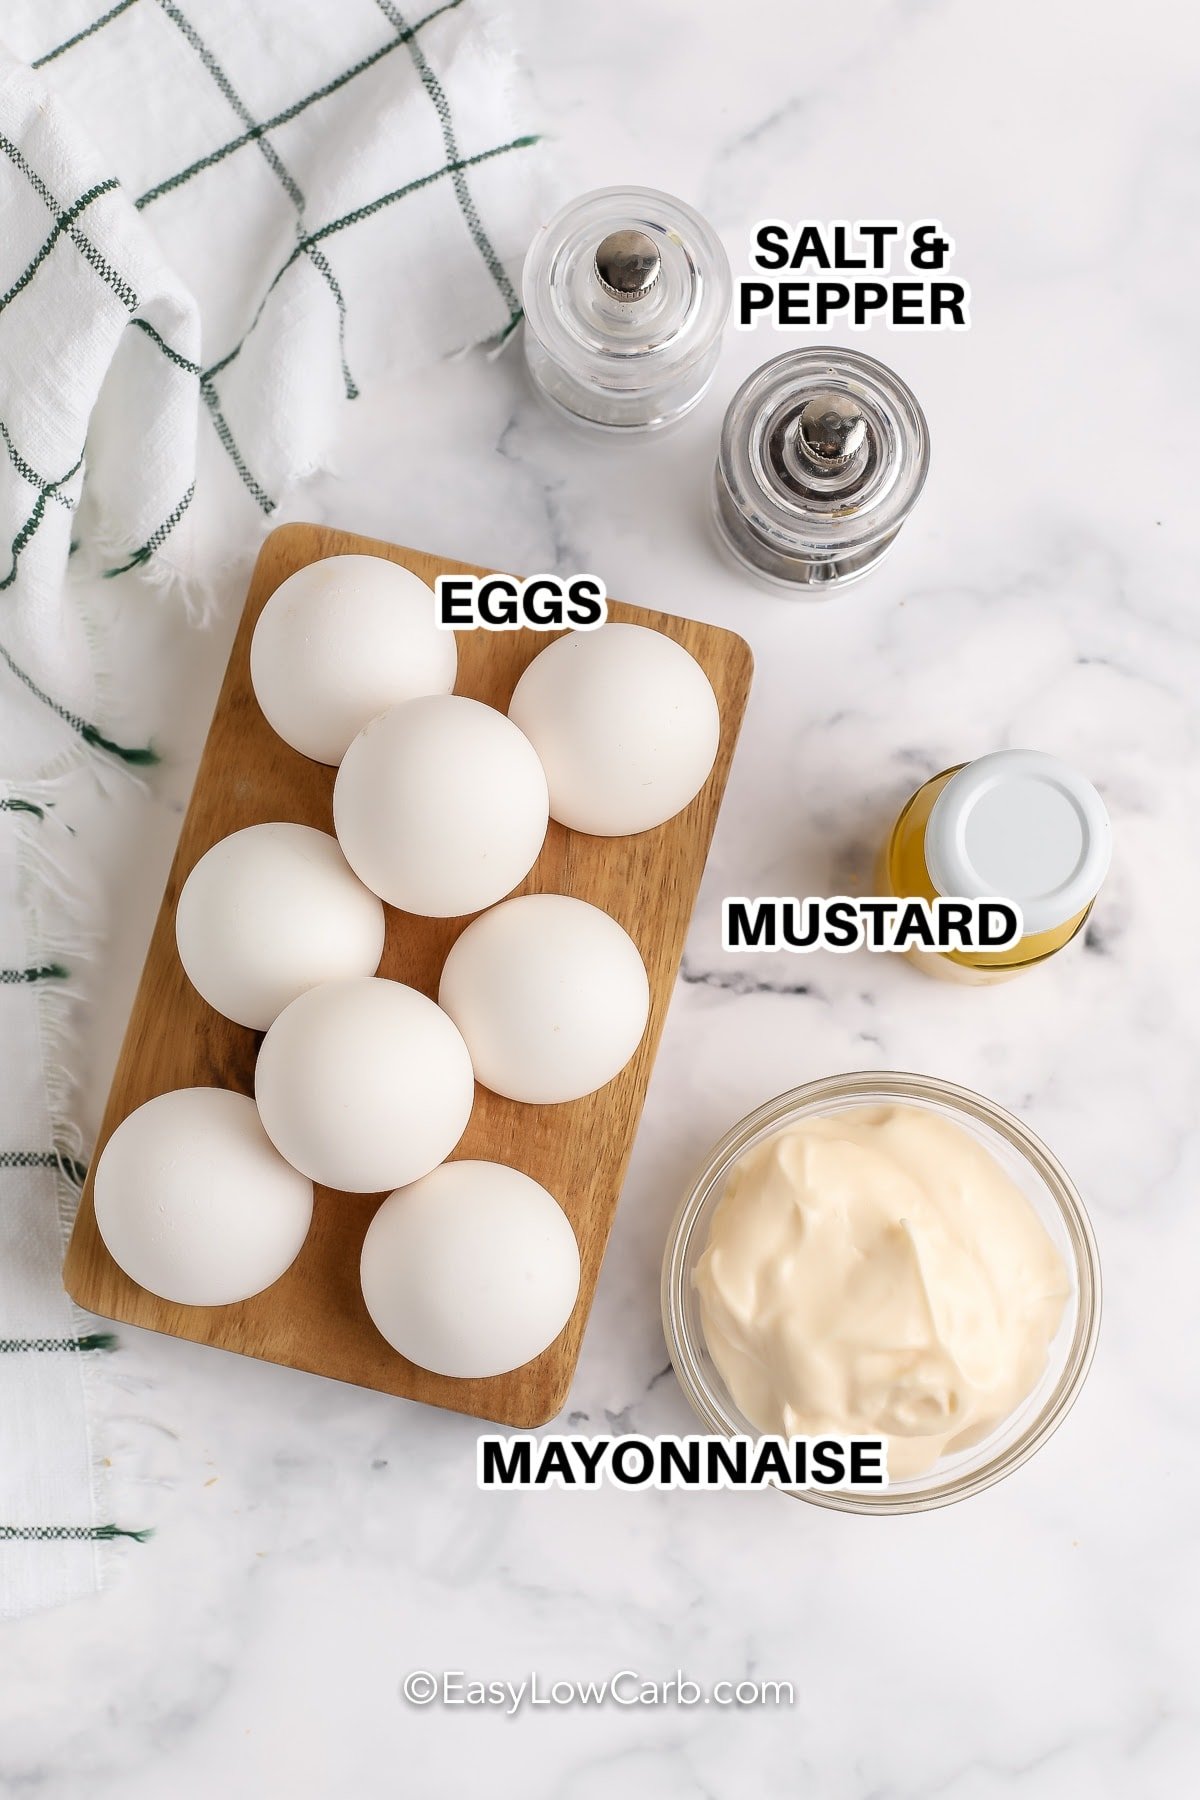 Ingredients to make Keto Egg Salad labeled: salt and pepper, mustard, eggs, and mayonnaise